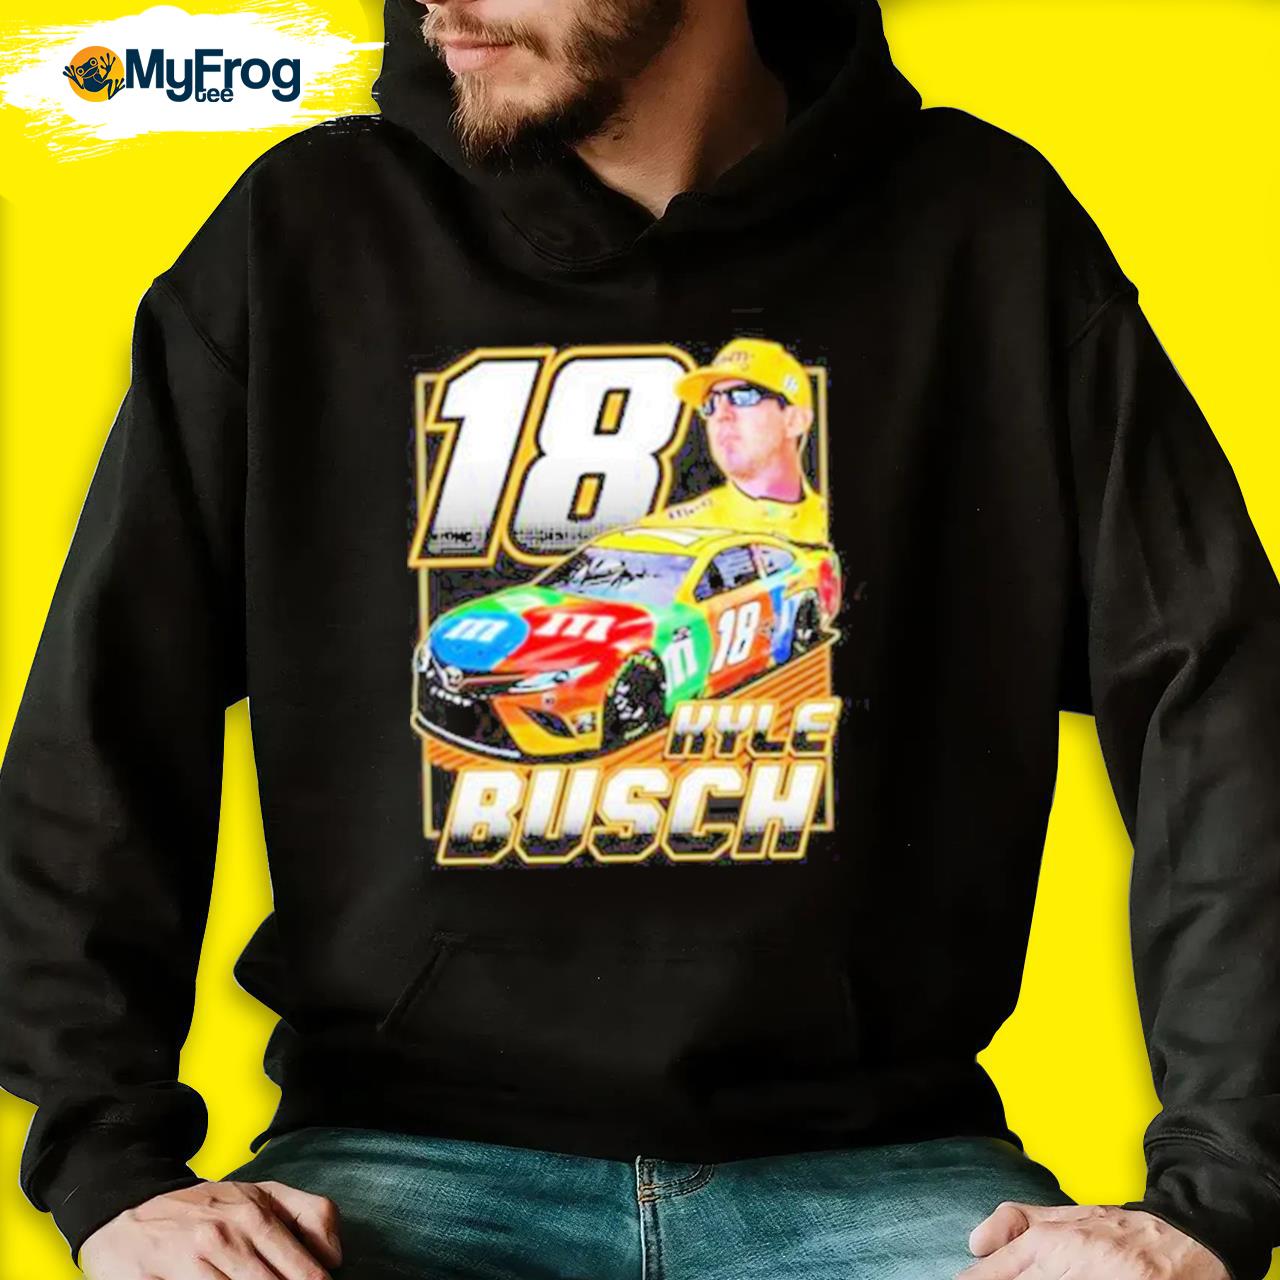 OFFICIAL Cars Hoodies & Sweaters